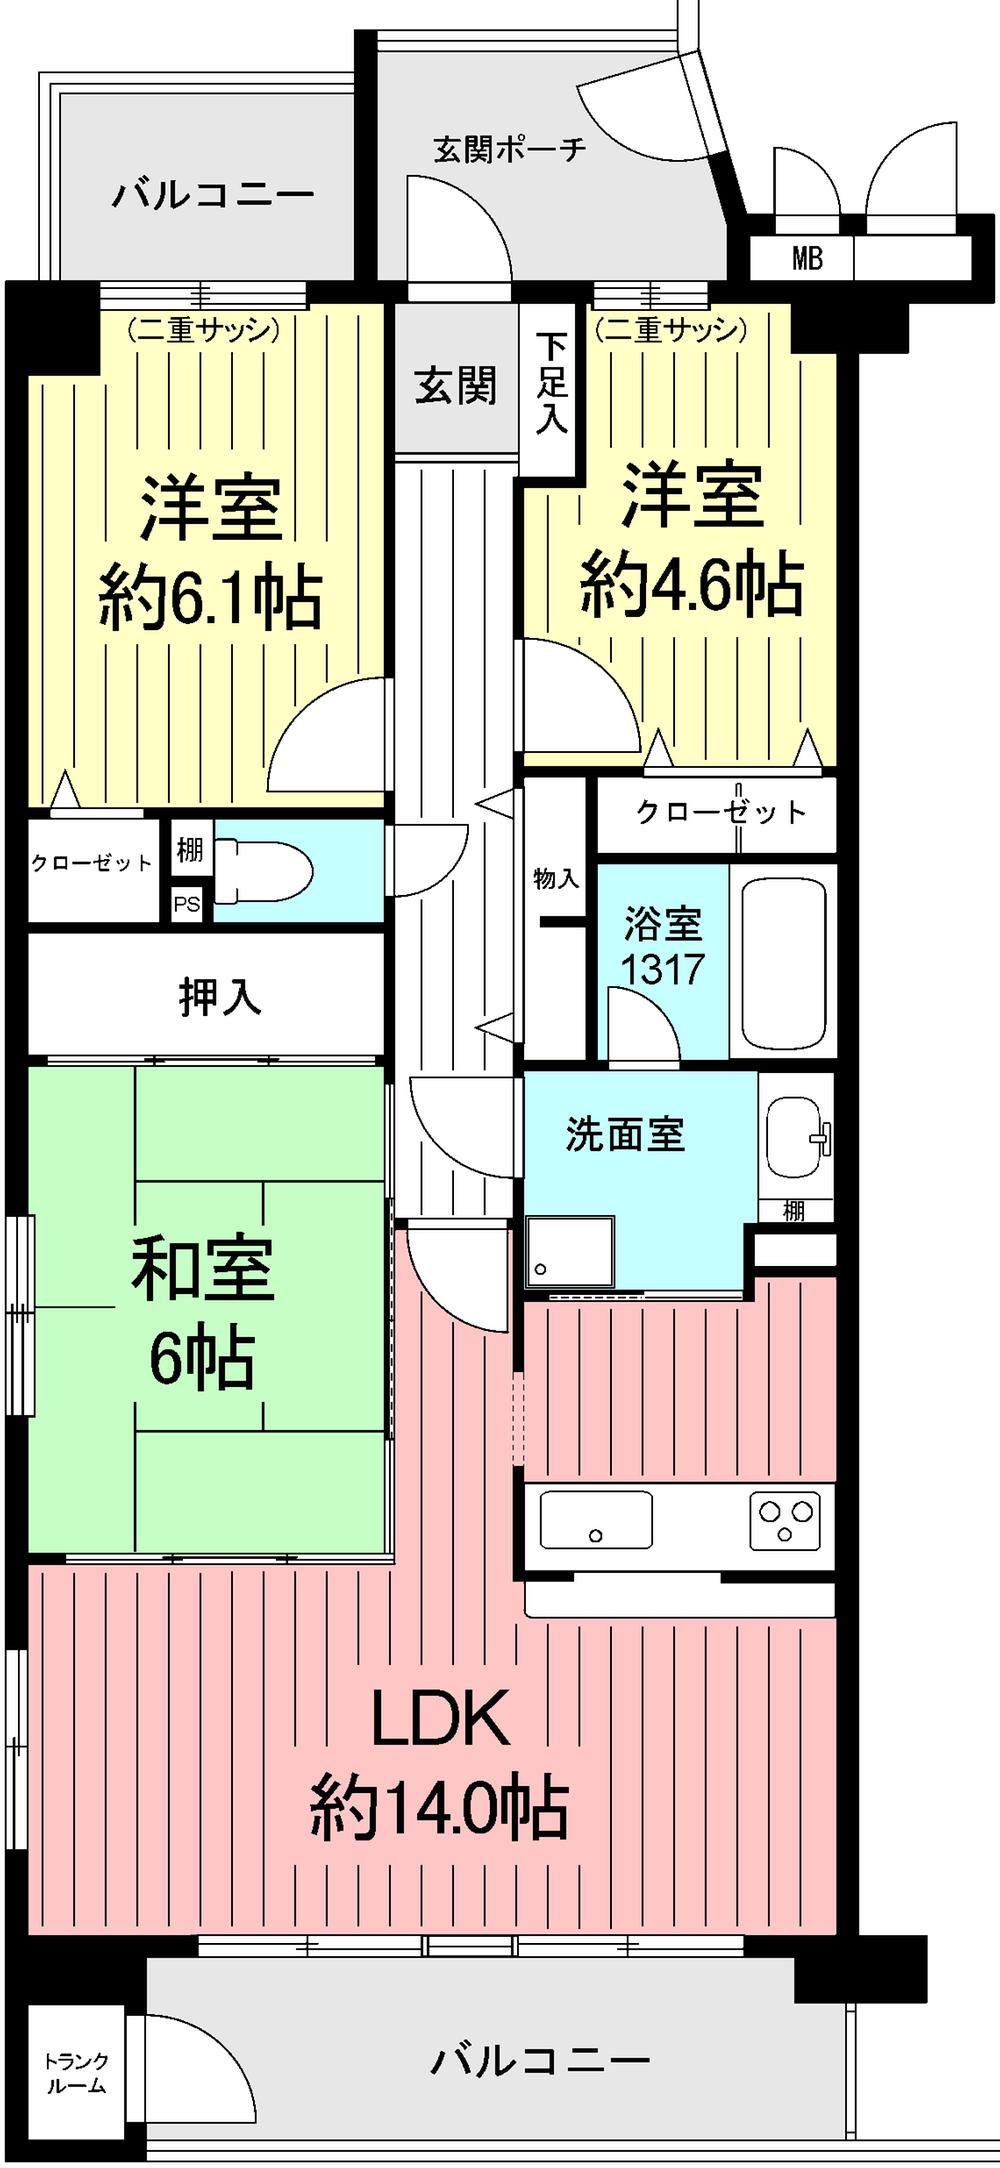 Floor plan. 3LDK, Price 29,700,000 yen, Footprint 70.2 sq m , Balcony area 11.21 sq m southwest corner room  South ・ West ・ Opening to the north of the three-way (window) is located ventilation good